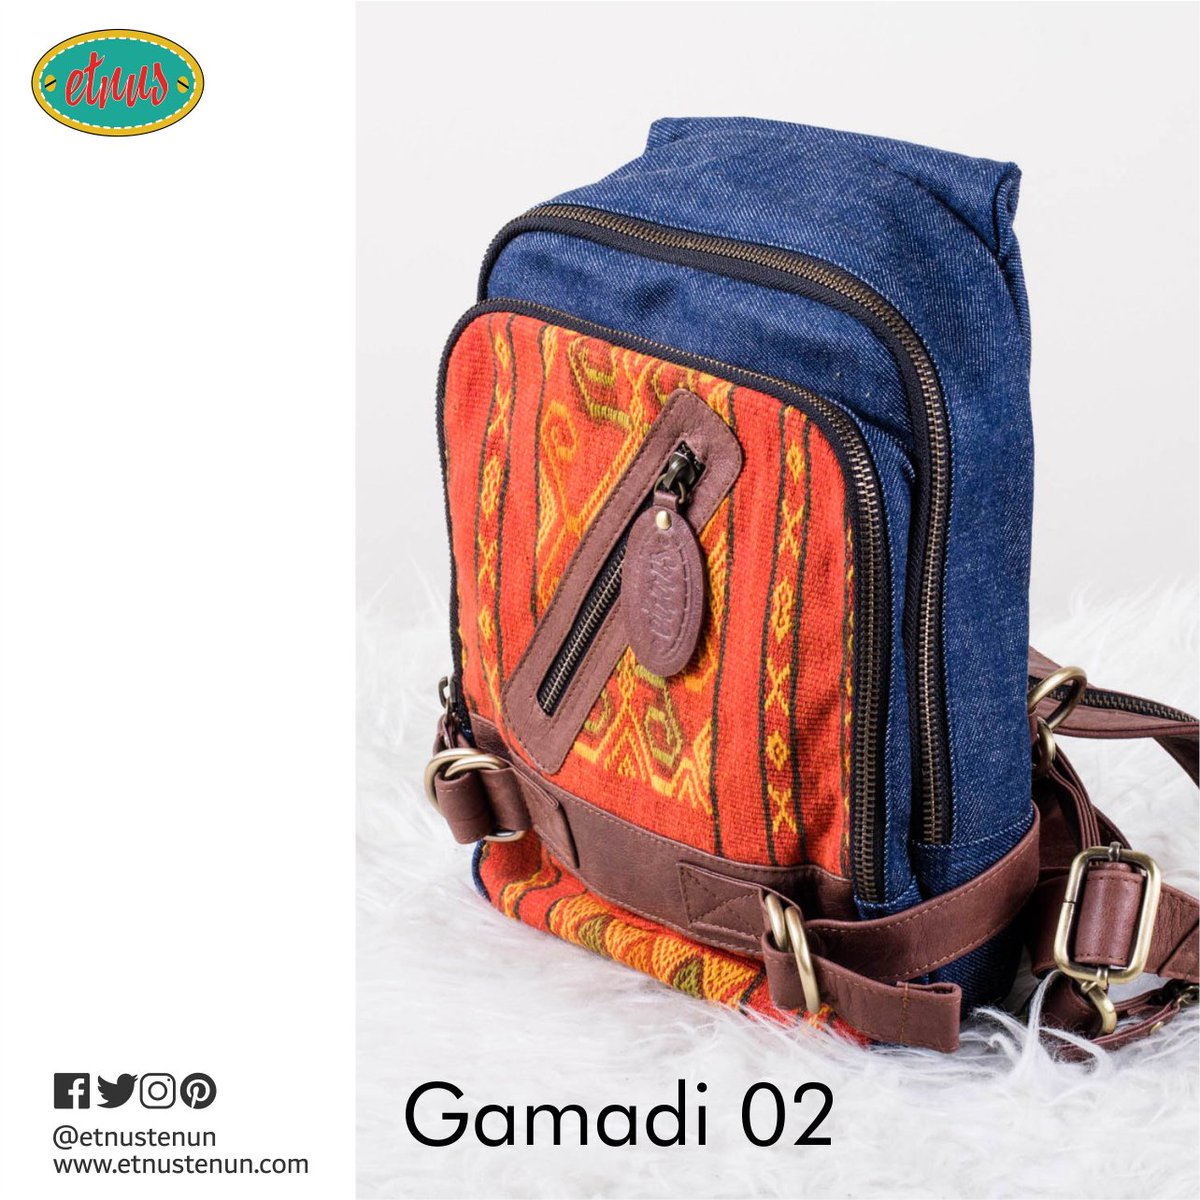 It’s a kind of good balance of a backpack which switchable to a shoulder bag. Load more, casual more. 

#casualbag

#backpackforwoman

#casualbackpack

#casualstyle

#ethnicstyle

#denimbag

#tasetnik

#tasranselwanita

#giniginigoonline

etnustenun.com/woven-bags/gam…